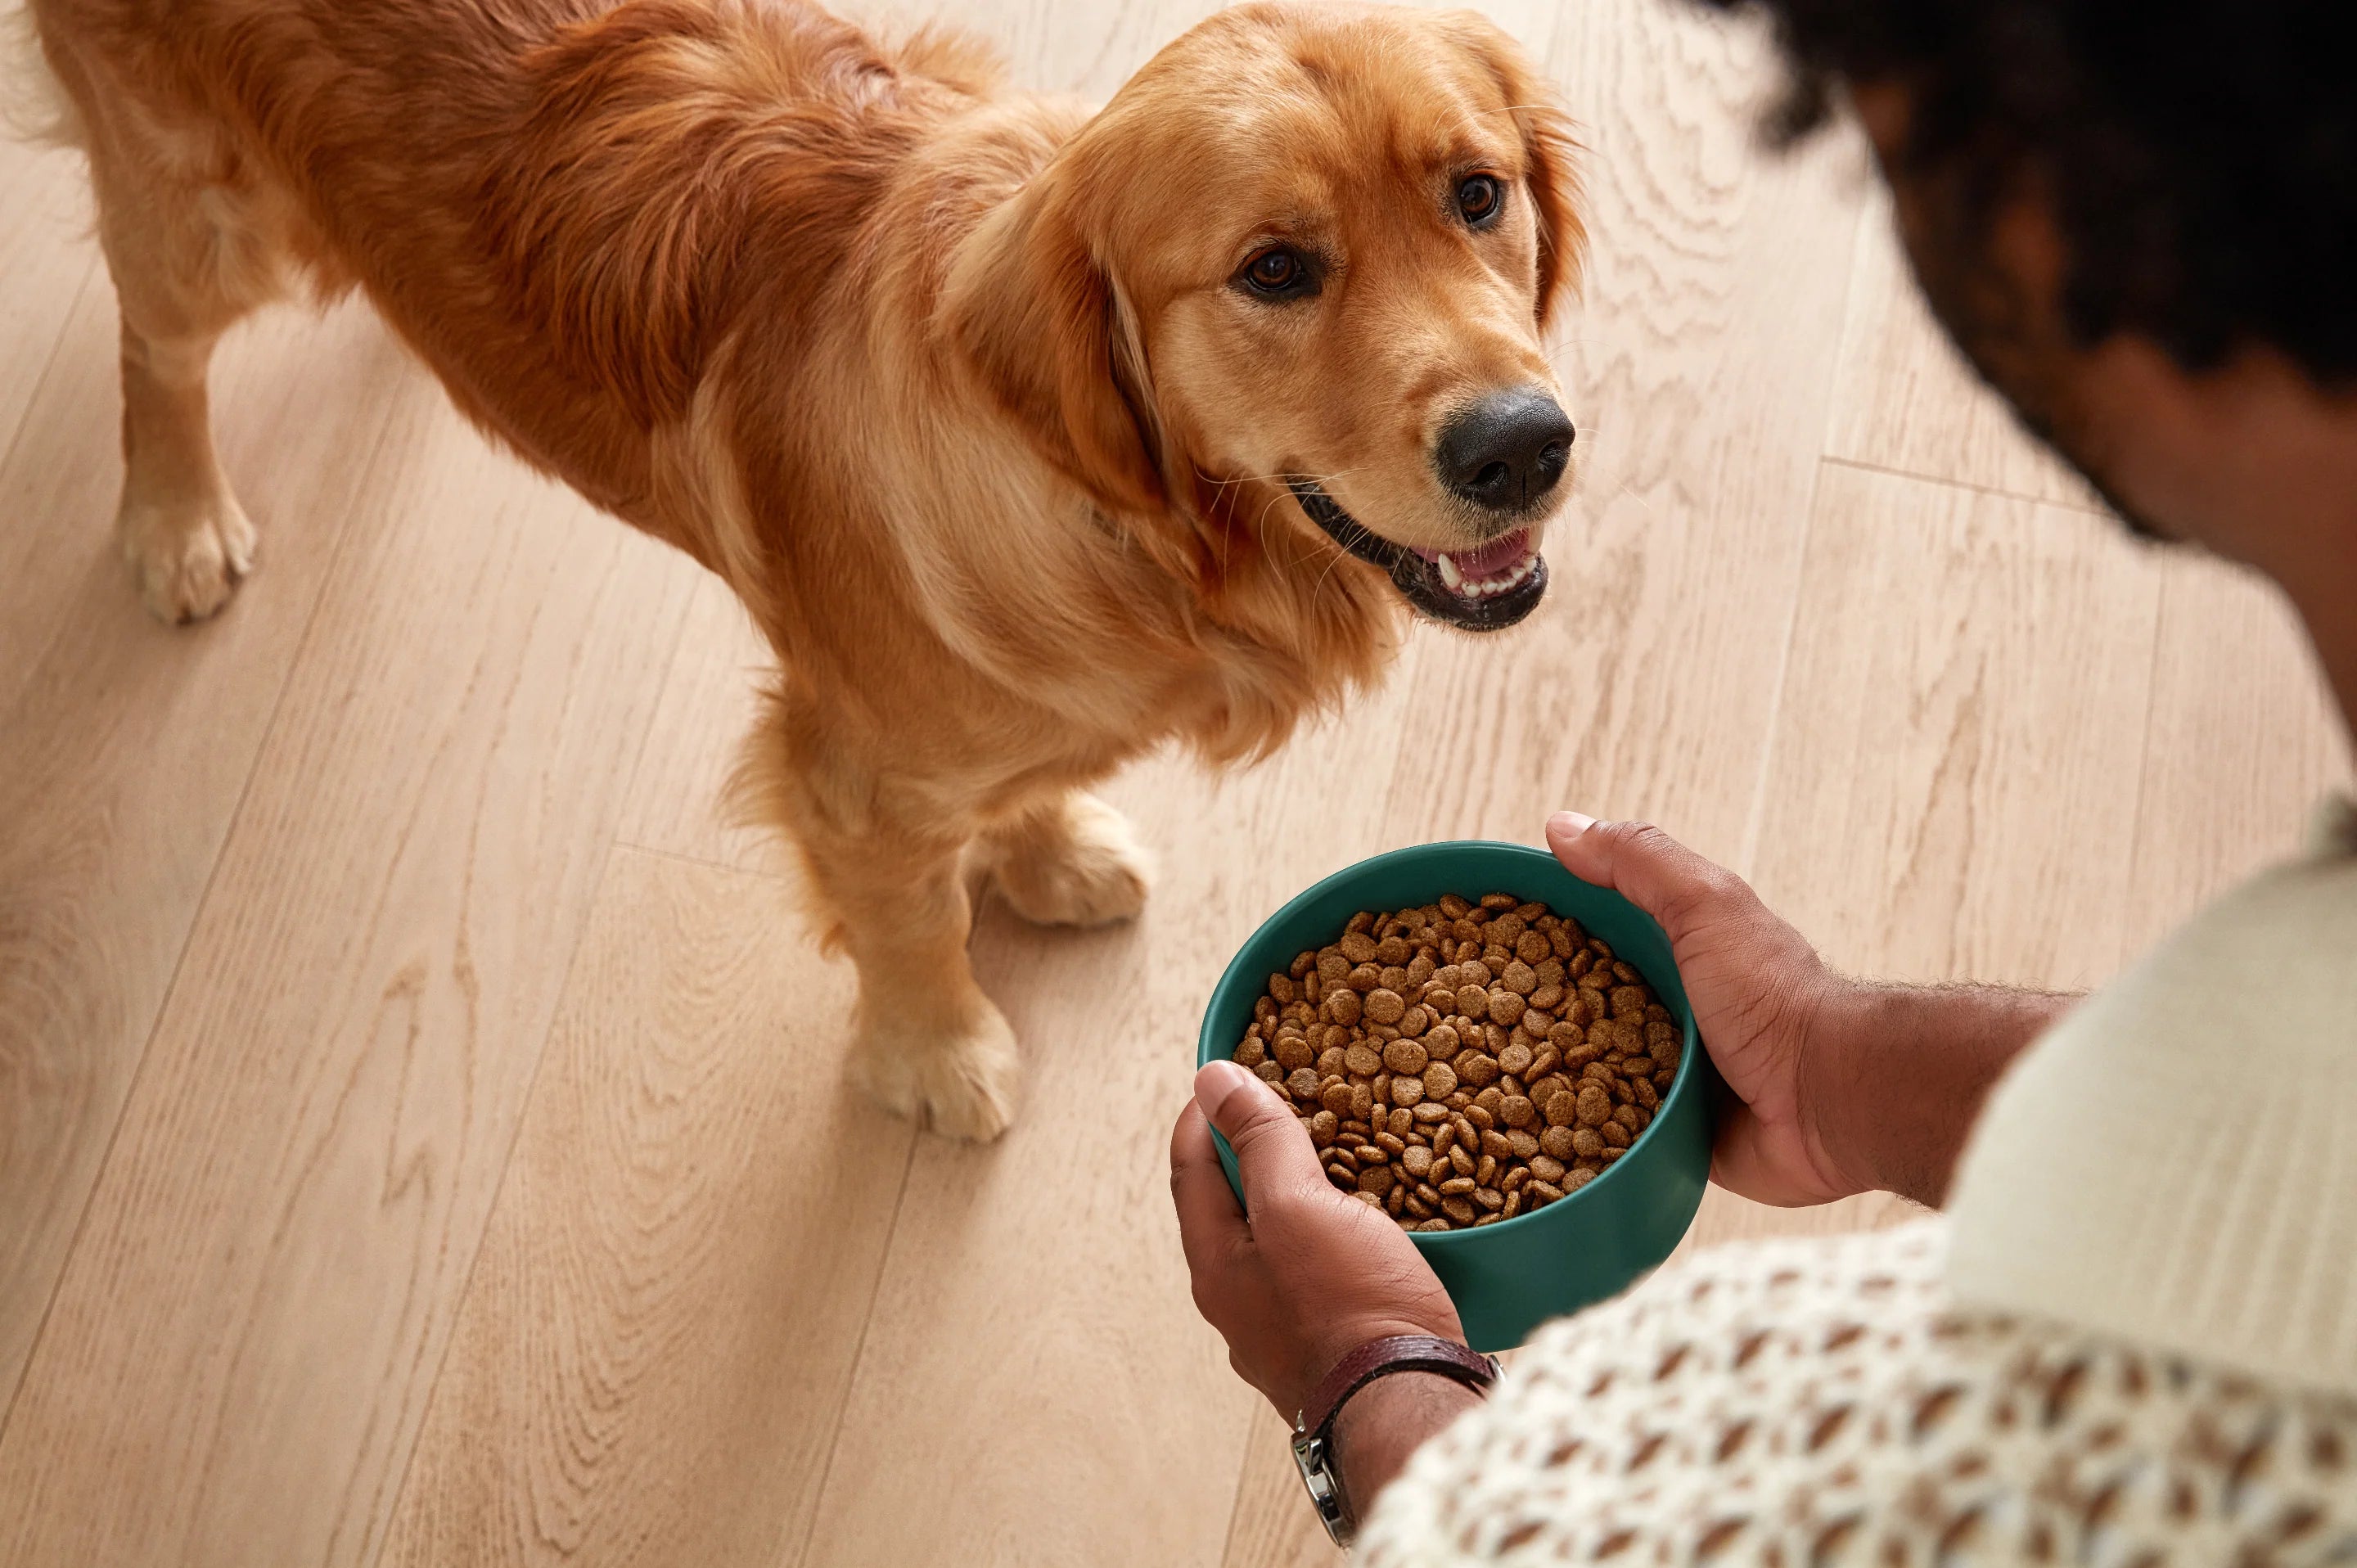 Ask a Vet: Is My Dog a Healthy Weight?